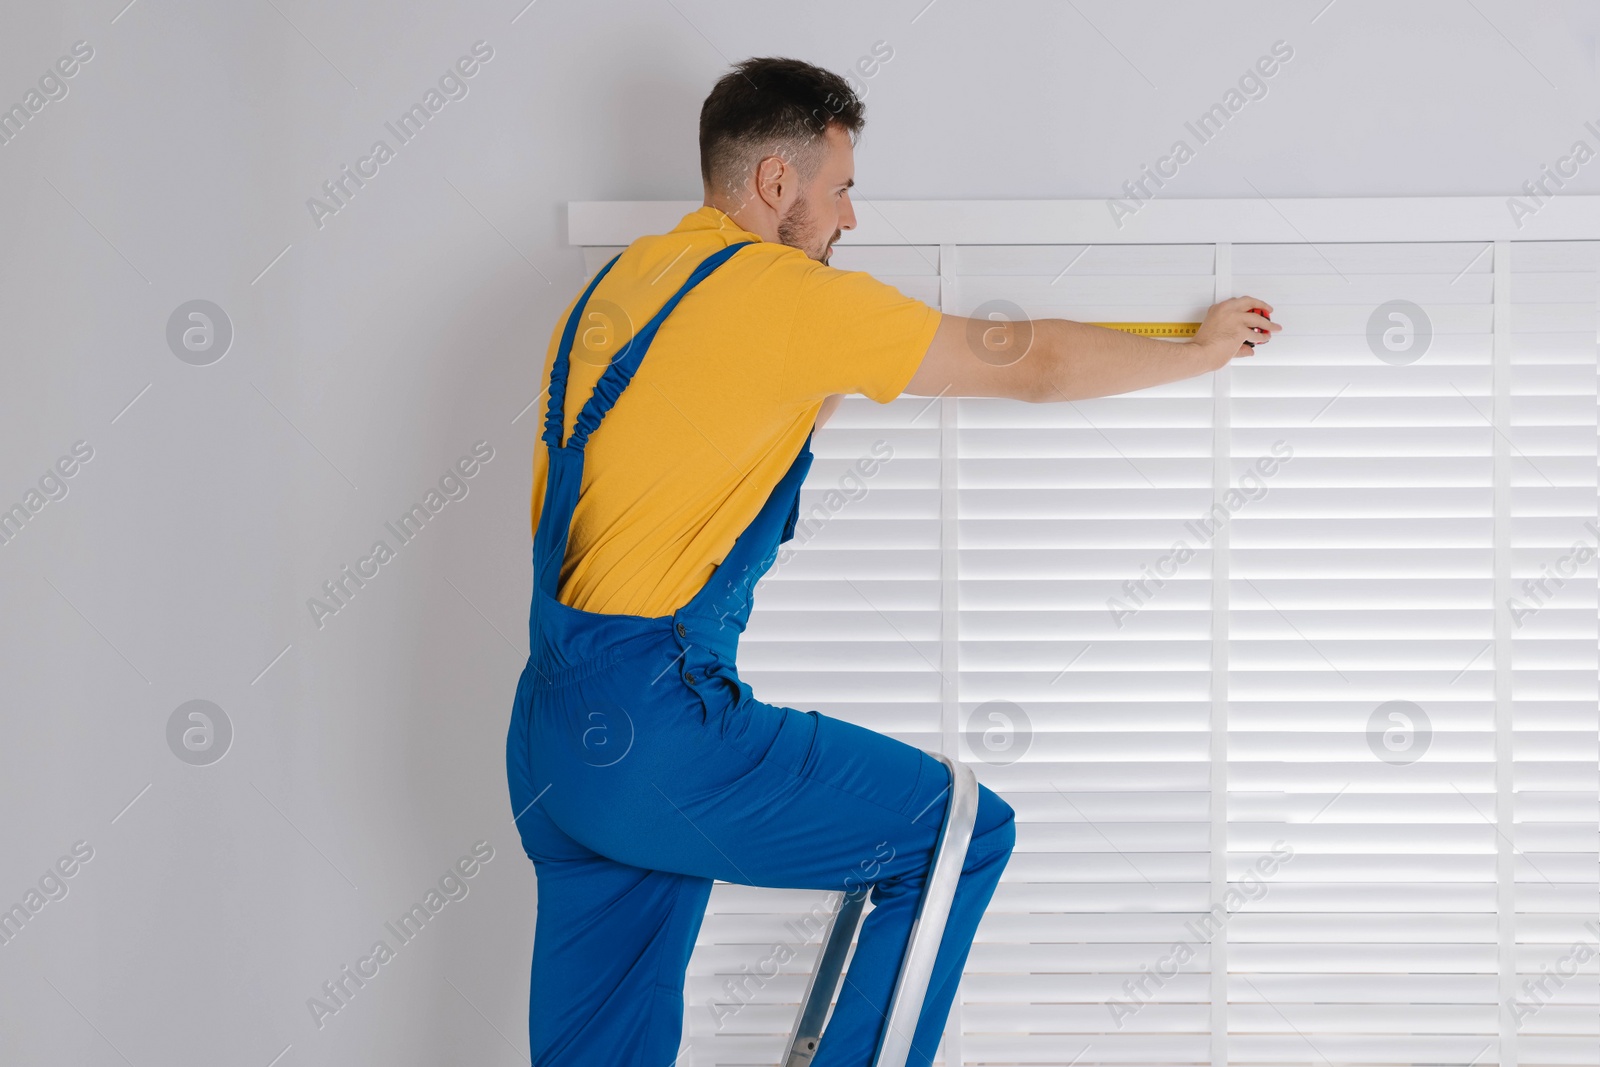 Photo of Worker in uniform using measuring tape while installing horizontal window blinds on stepladder indoors